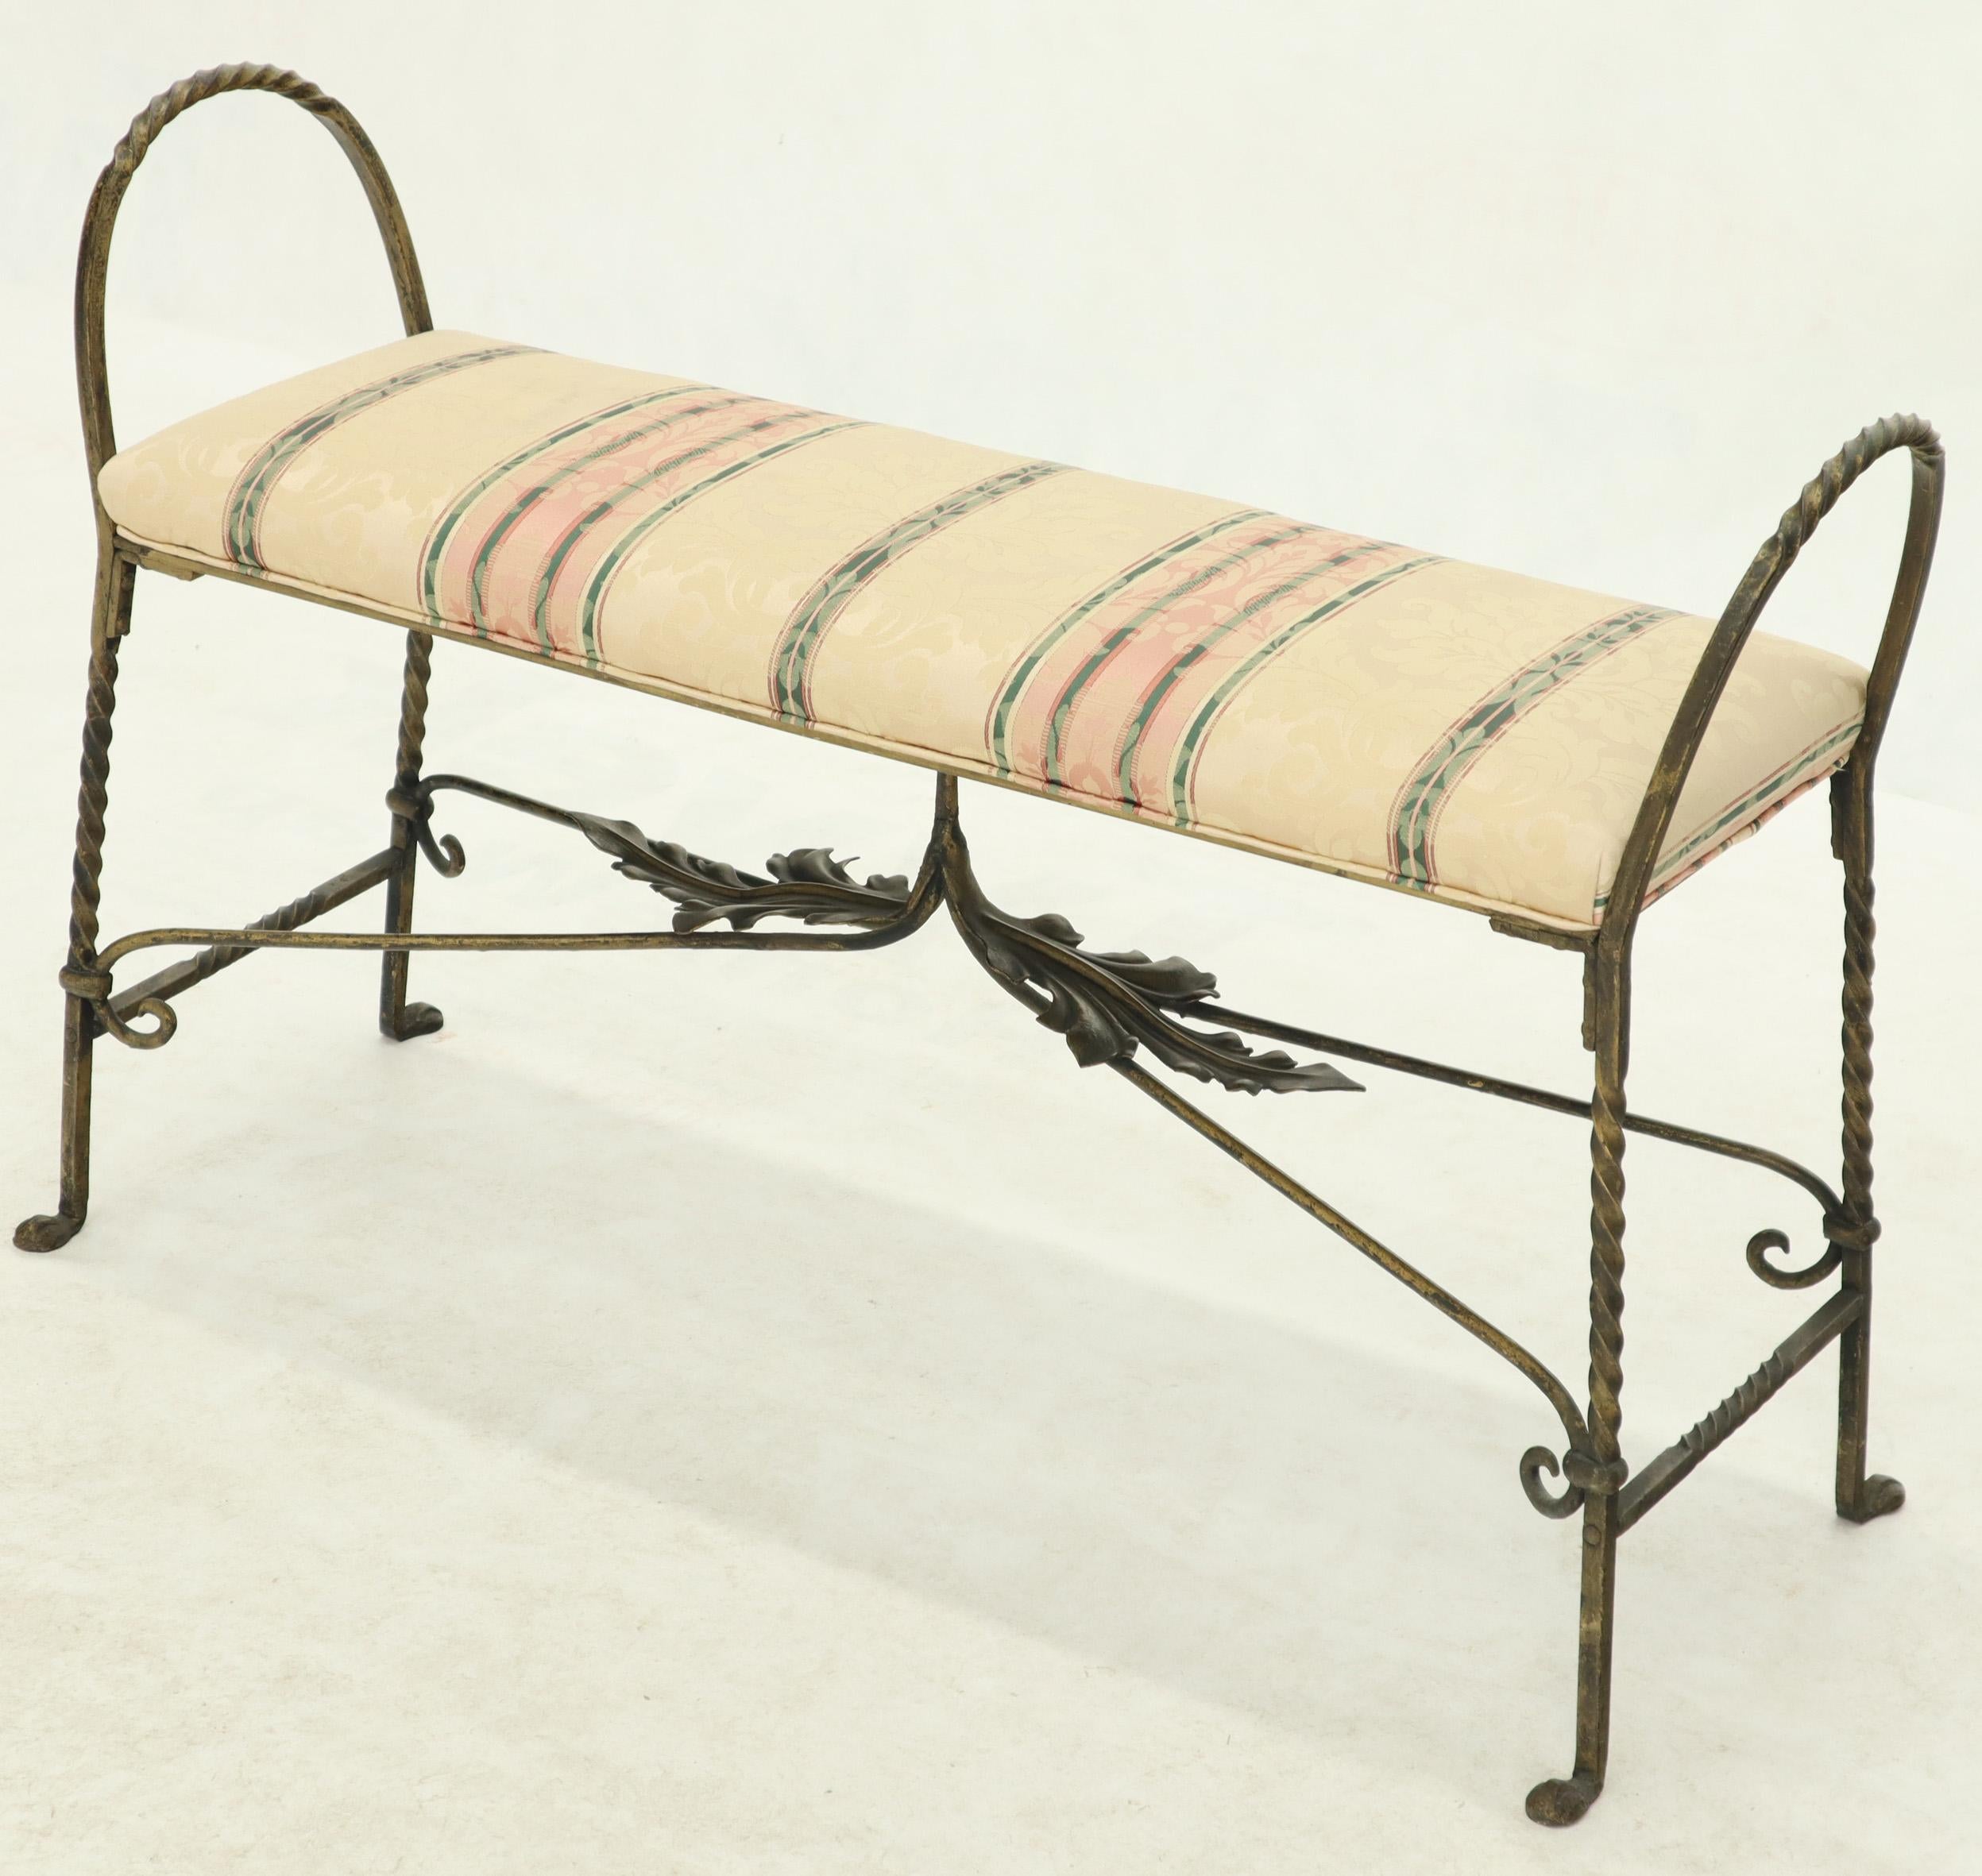 Nice compact vintage wrought iron patinated brass finish window bench.